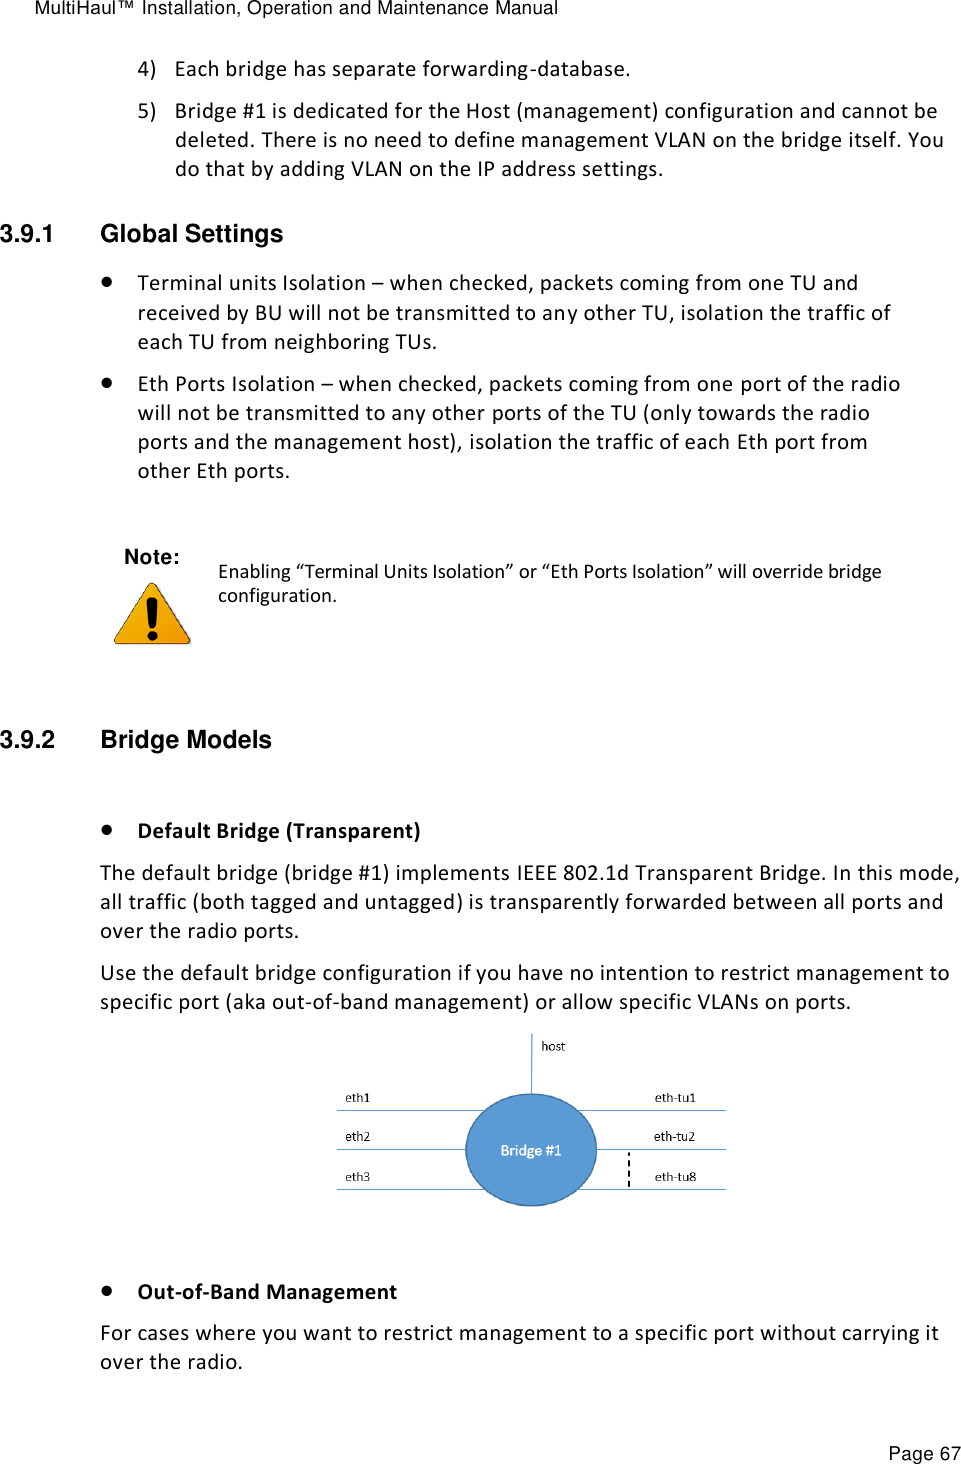 MultiHaul™ Installation, Operation and Maintenance Manual Page 67 4) Each bridge has separate forwarding-database. 5) Bridge #1 is dedicated for the Host (management) configuration and cannot be deleted. There is no need to define management VLAN on the bridge itself. You do that by adding VLAN on the IP address settings. 3.9.1  Global Settings  Terminal units Isolation – when checked, packets coming from one TU and received by BU will not be transmitted to any other TU, isolation the traffic of each TU from neighboring TUs.   Eth Ports Isolation – when checked, packets coming from one port of the radio will not be transmitted to any other ports of the TU (only towards the radio ports and the management host), isolation the traffic of each Eth port from other Eth ports.  3.9.2  Bridge Models   Default Bridge (Transparent) The default bridge (bridge #1) implements IEEE 802.1d Transparent Bridge. In this mode, all traffic (both tagged and untagged) is transparently forwarded between all ports and over the radio ports. Use the default bridge configuration if you have no intention to restrict management to specific port (aka out-of-band management) or allow specific VLANs on ports.    Out-of-Band Management For cases where you want to restrict management to a specific port without carrying it over the radio. Note:  Enabling “Terminal Units Isolation” or “Eth Ports Isolation” will override bridge configuration. 